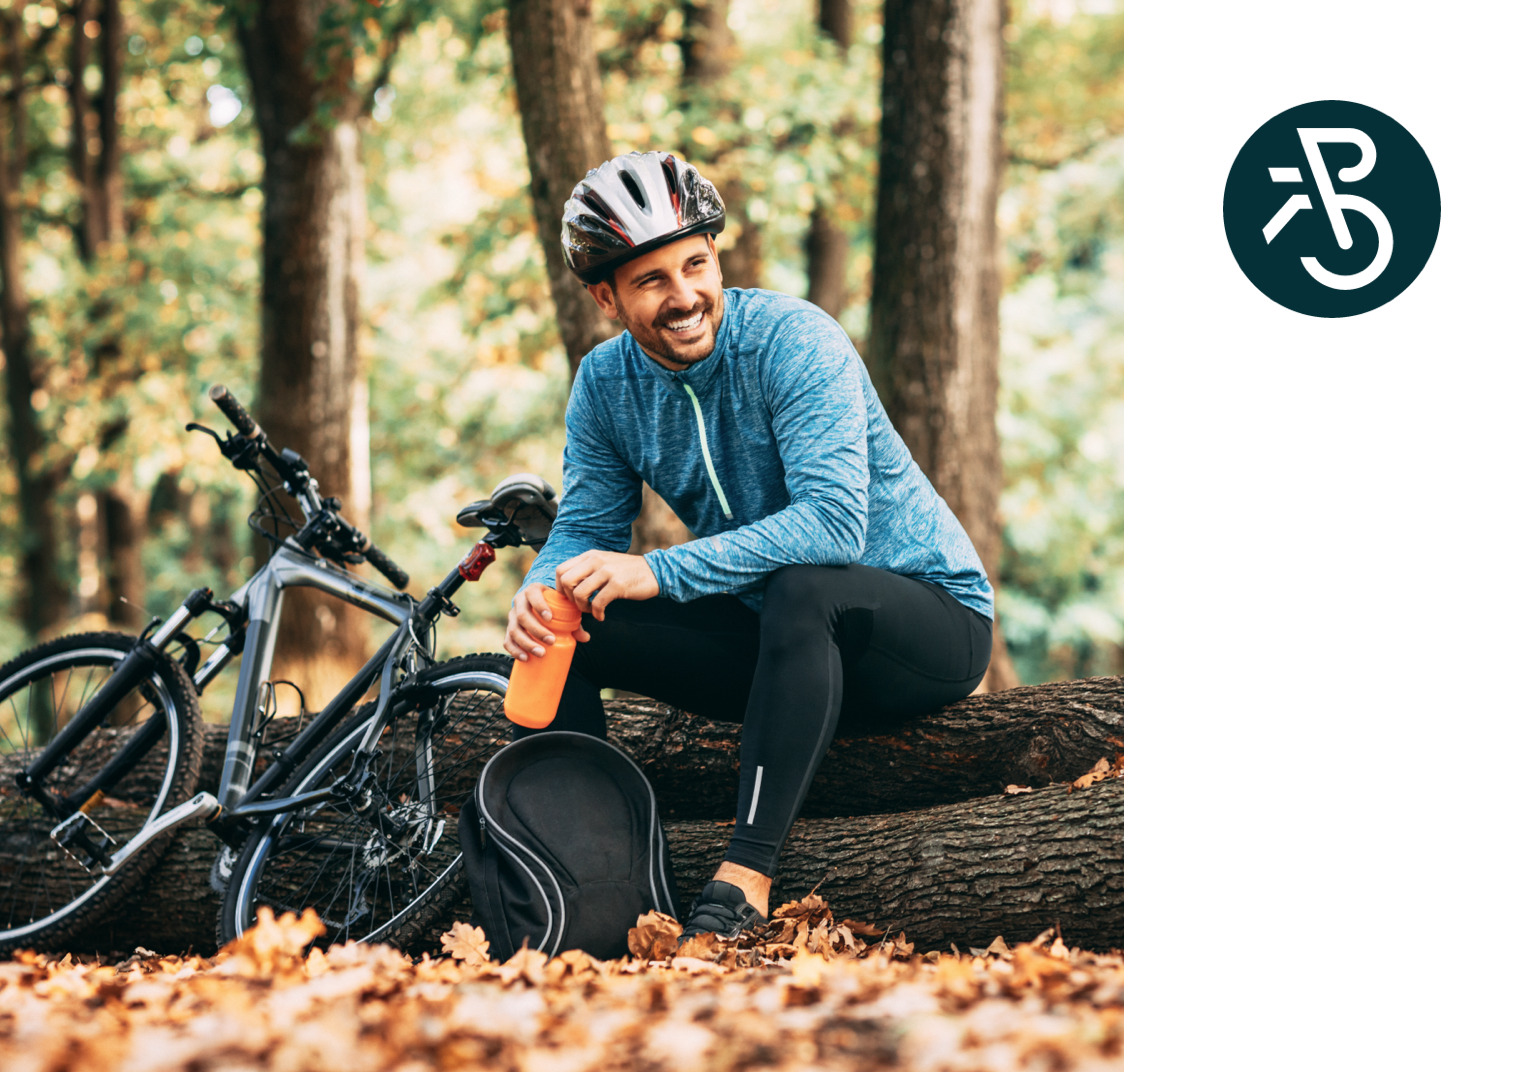 Bikes.de is a German online marketplace that showcases, sells and services bicycles and e-bikes